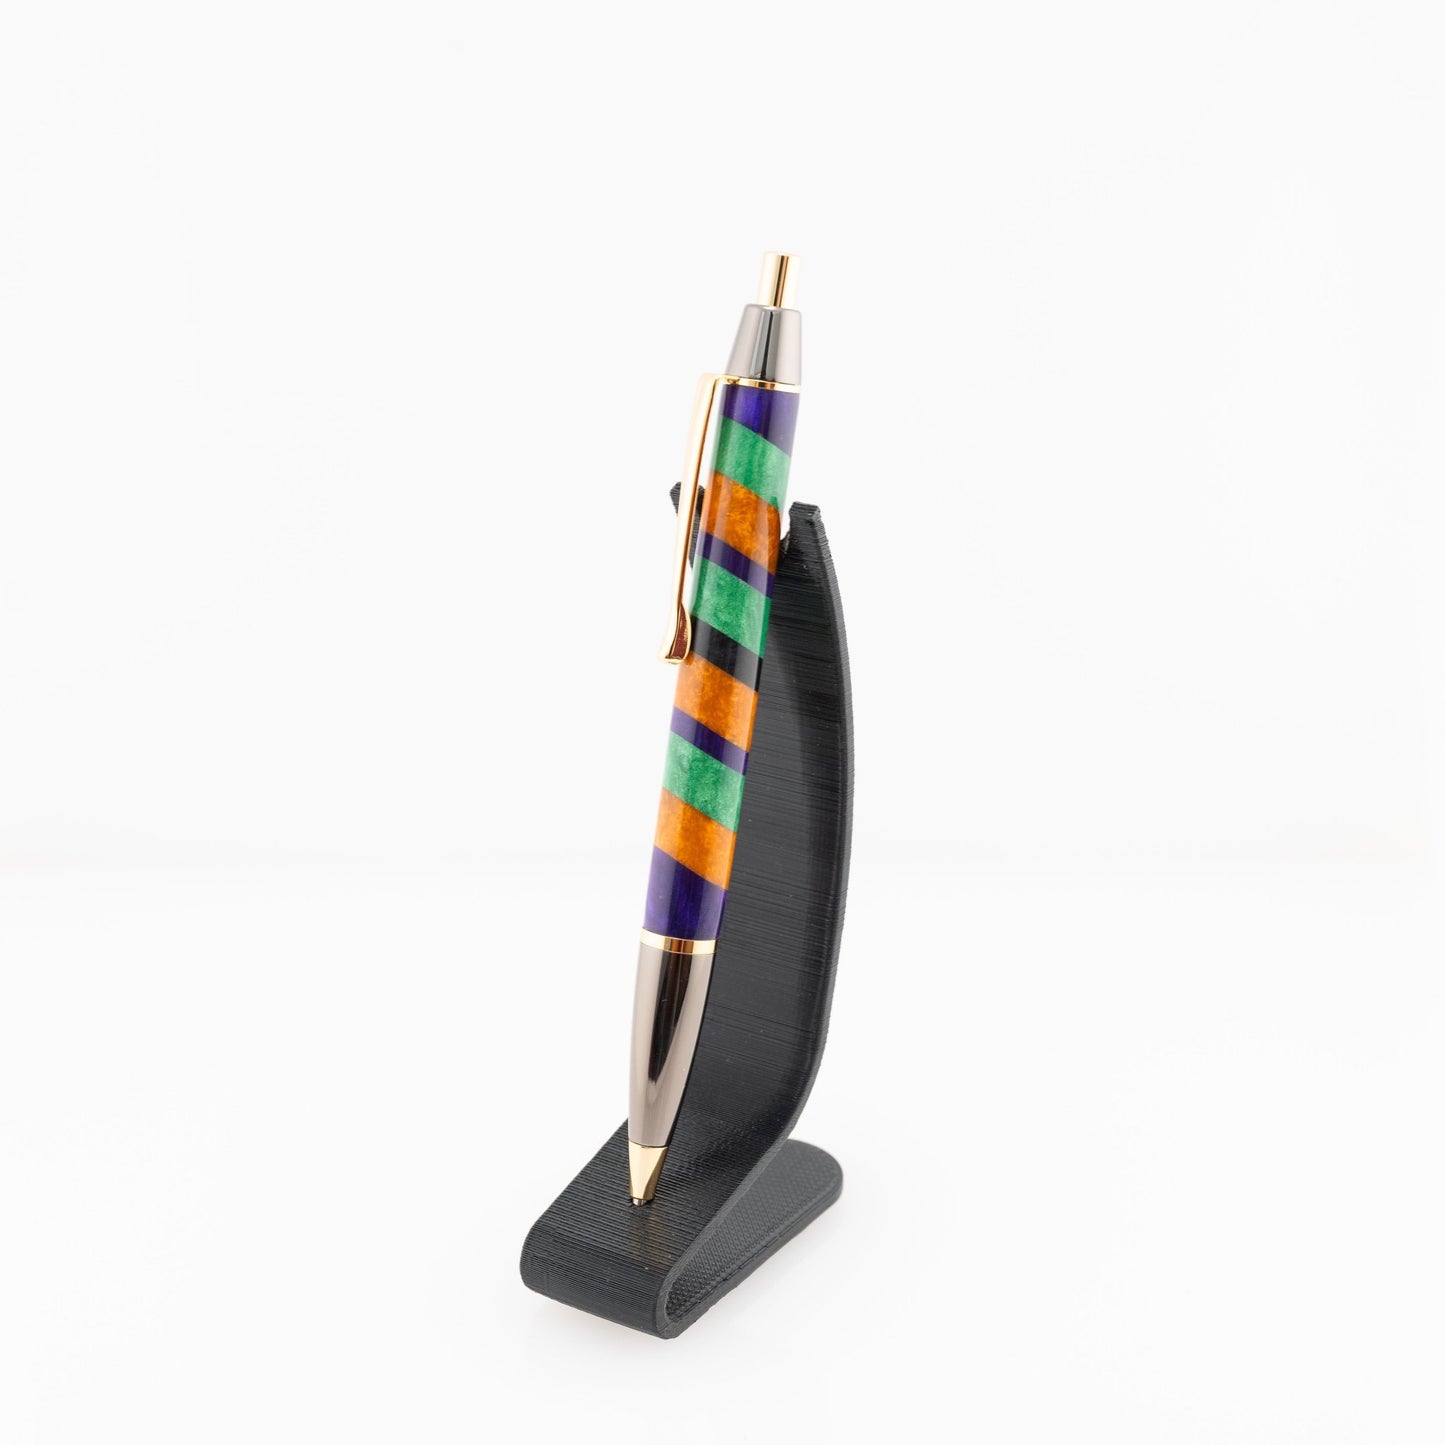 Orange, purple, and green handmade striped resin ballpoint click pen with gold and gunmetal plating on a black stand.